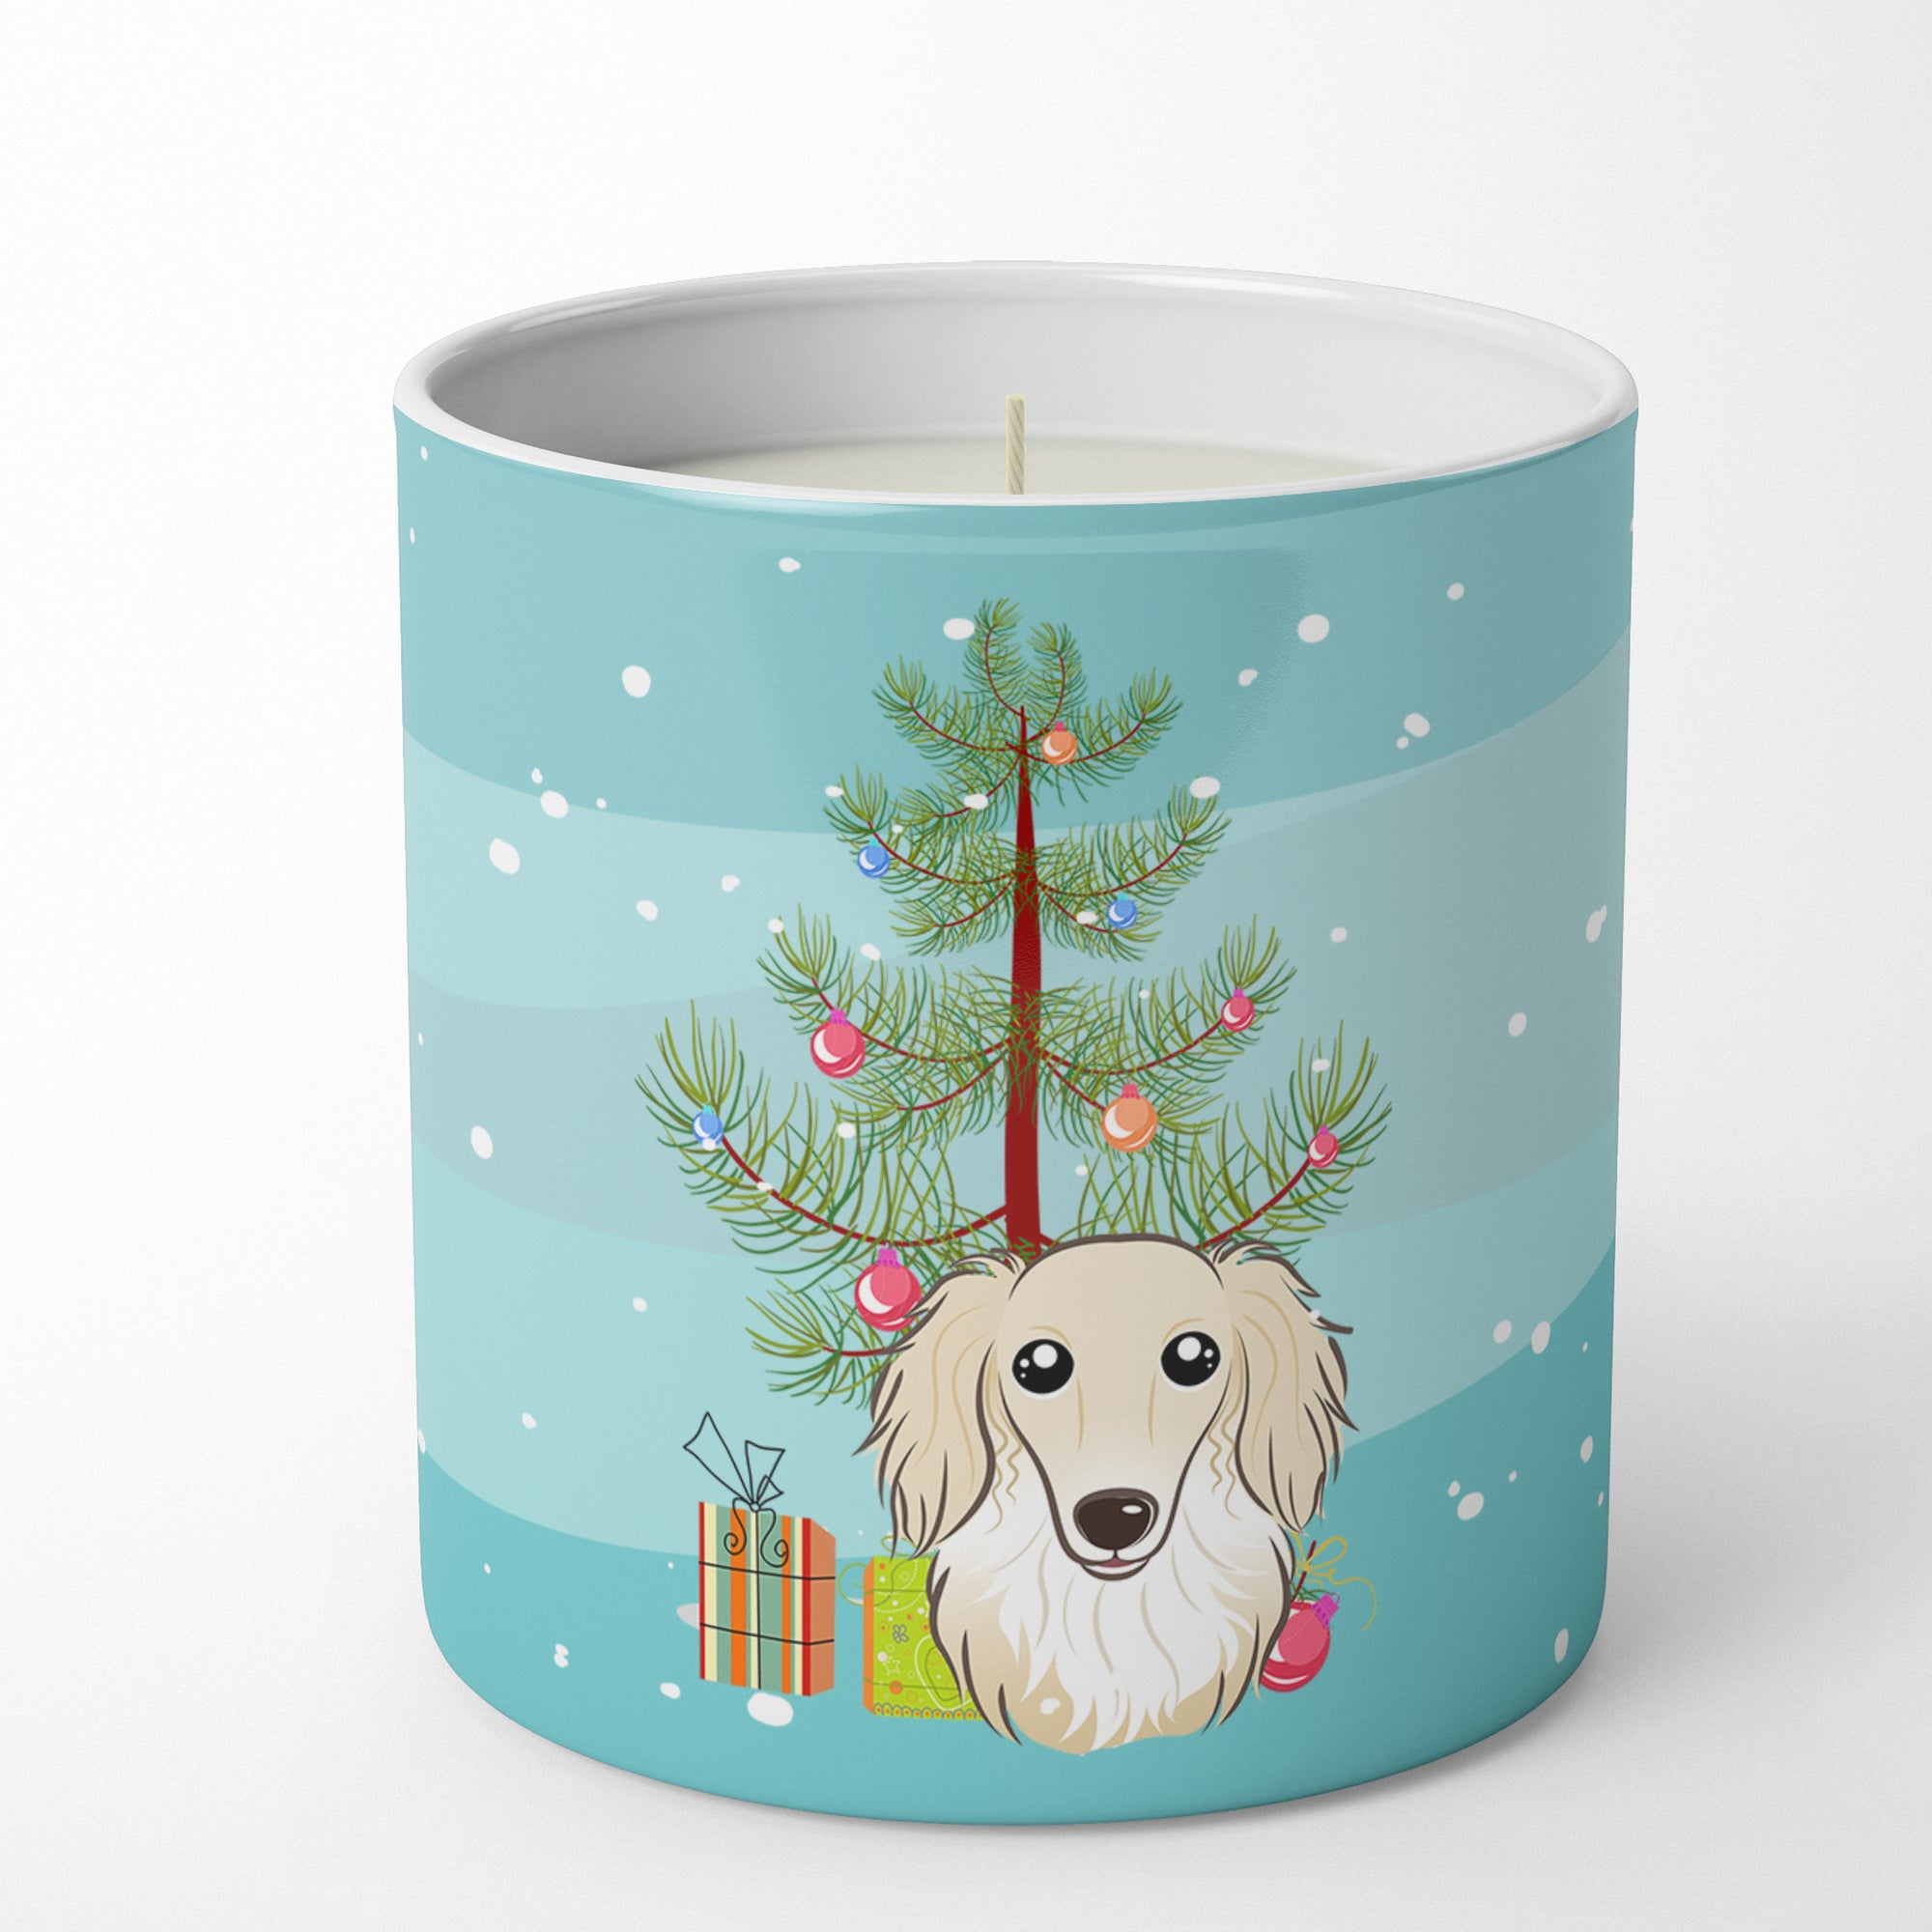 Buy this Christmas Tree and Longhair Creme Dachshund 10 oz Decorative Soy Candle